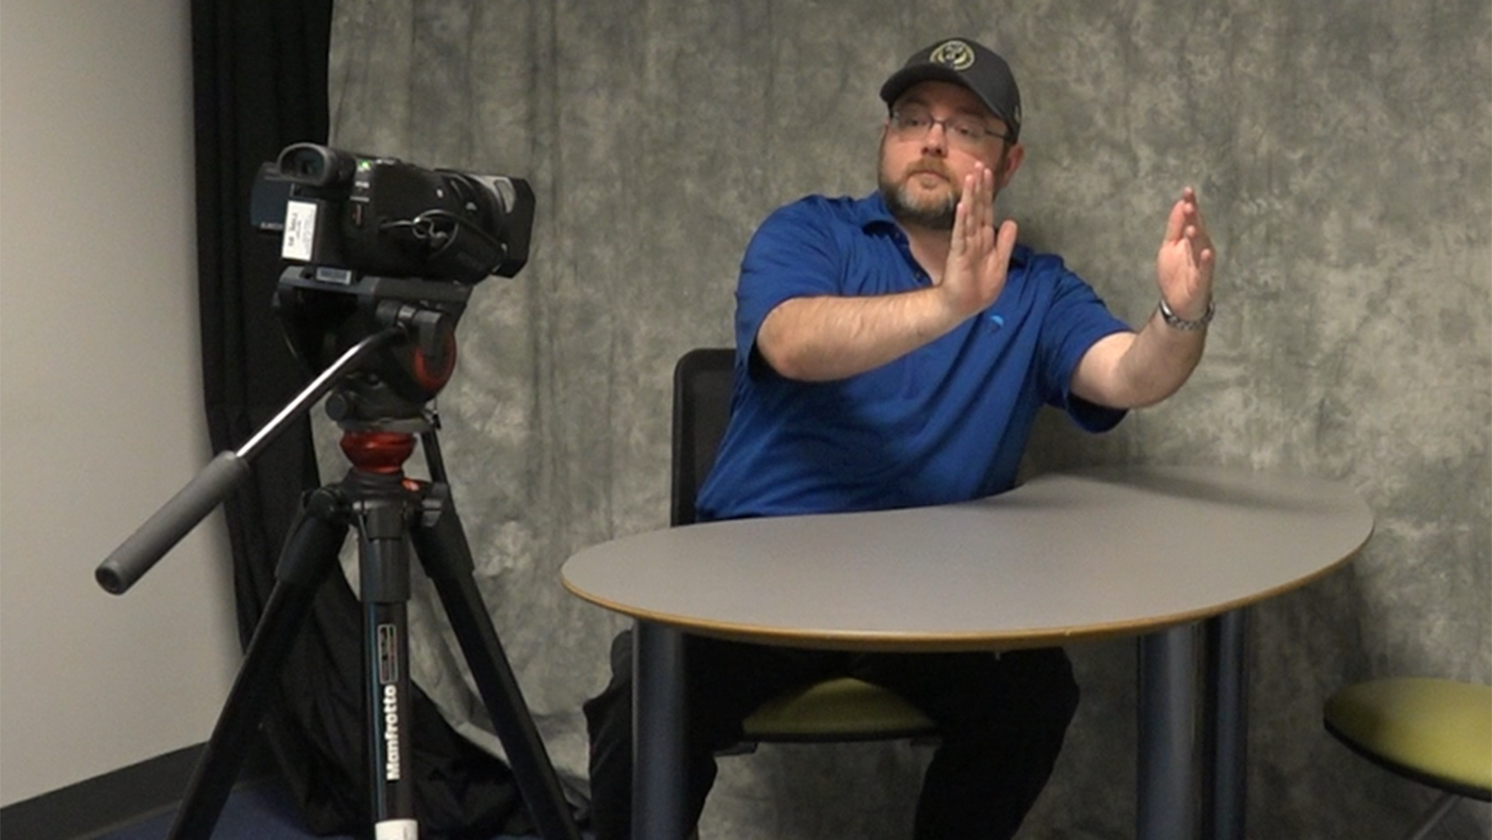 A person sitting at a table in front of a camera. They are using their hands to indicate positioning for the camera.